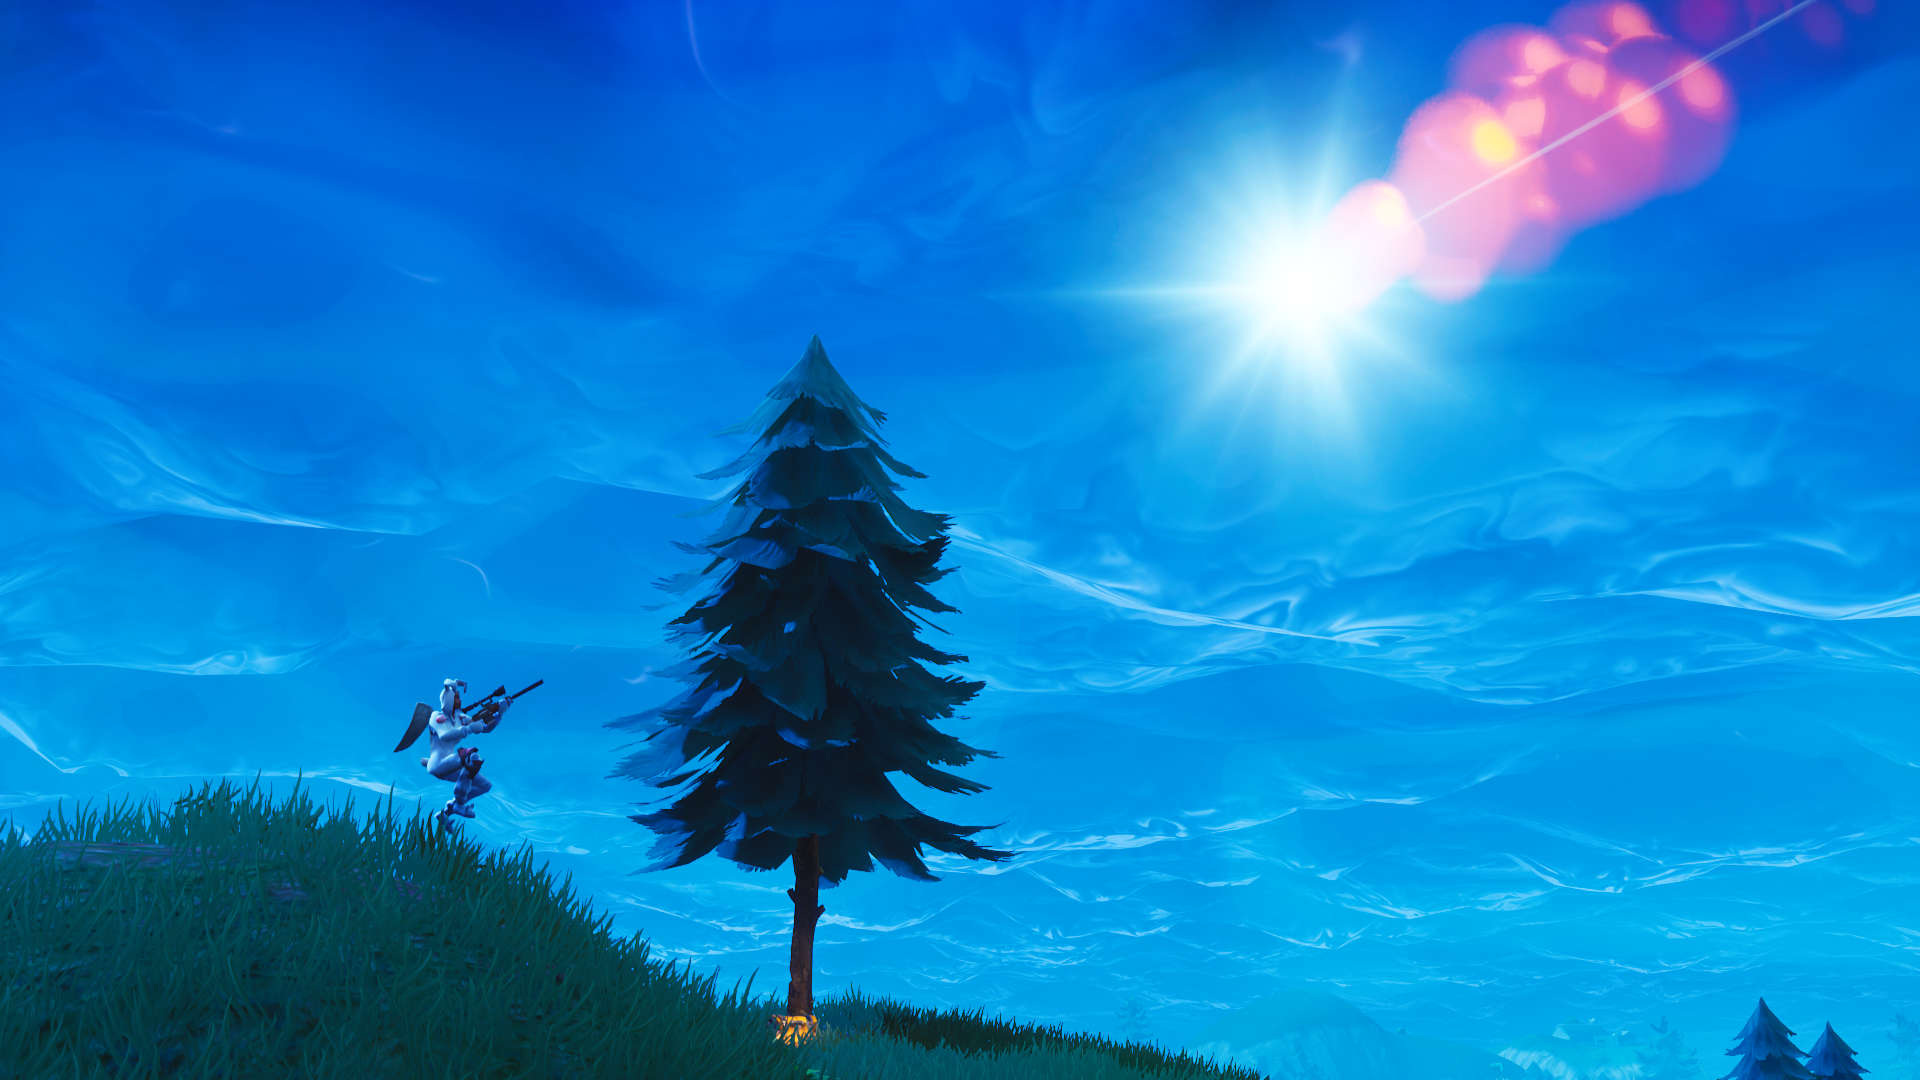 One of my favorite fortnite background